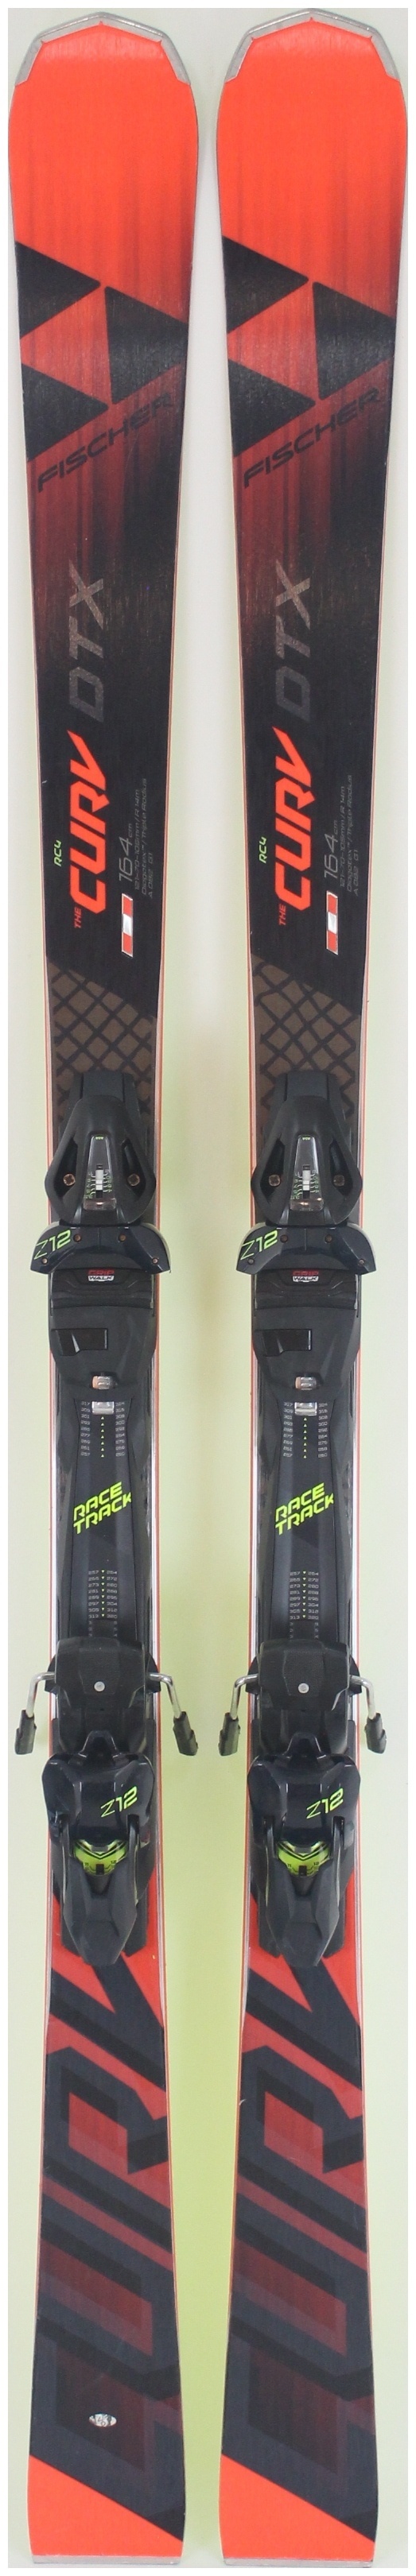 2020, Fischer, RC4 The Curv DTX Skis with Fischer Z12 RaceTrack Bindings  Used Demo Skis 164cm